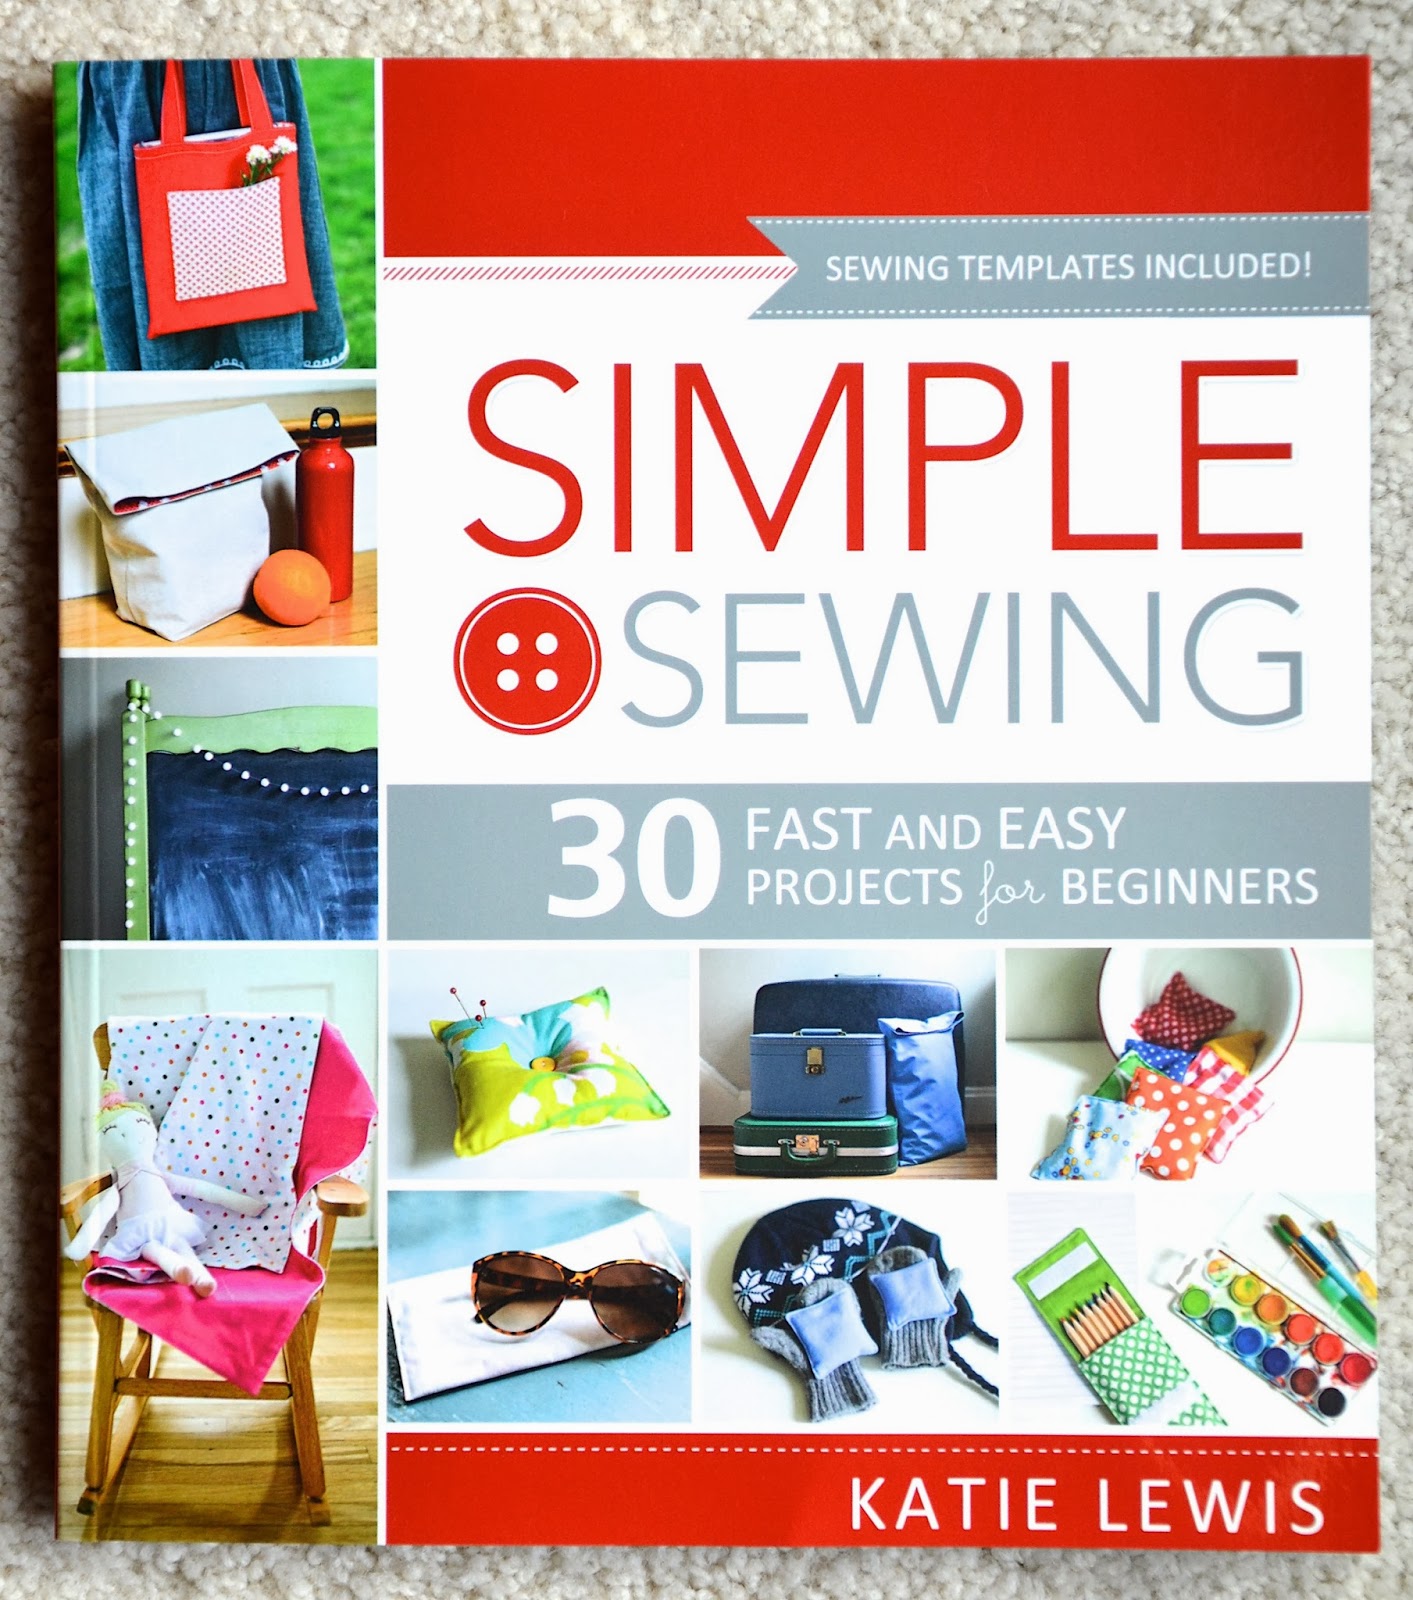 ikat bag: Book Review and Giveaway - Simple Sewing